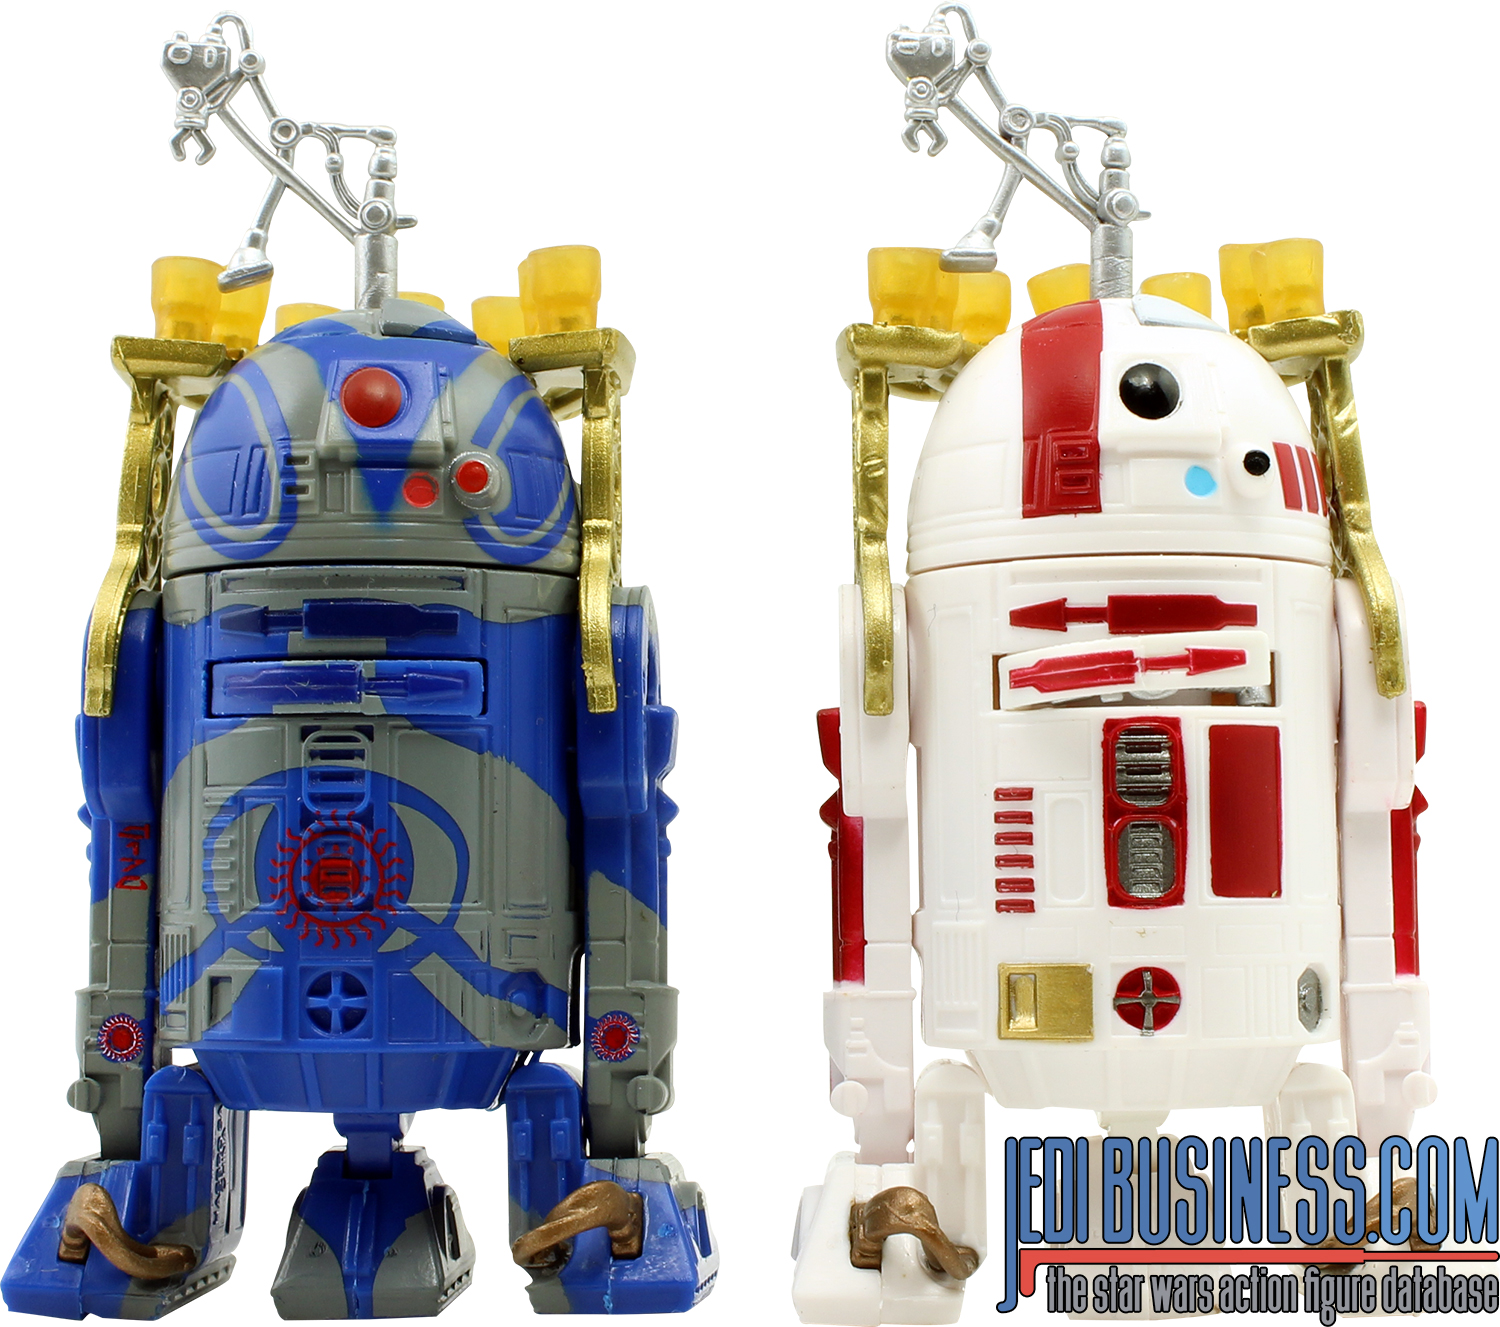 R2-C2 Entertainment Earth 6-Pack